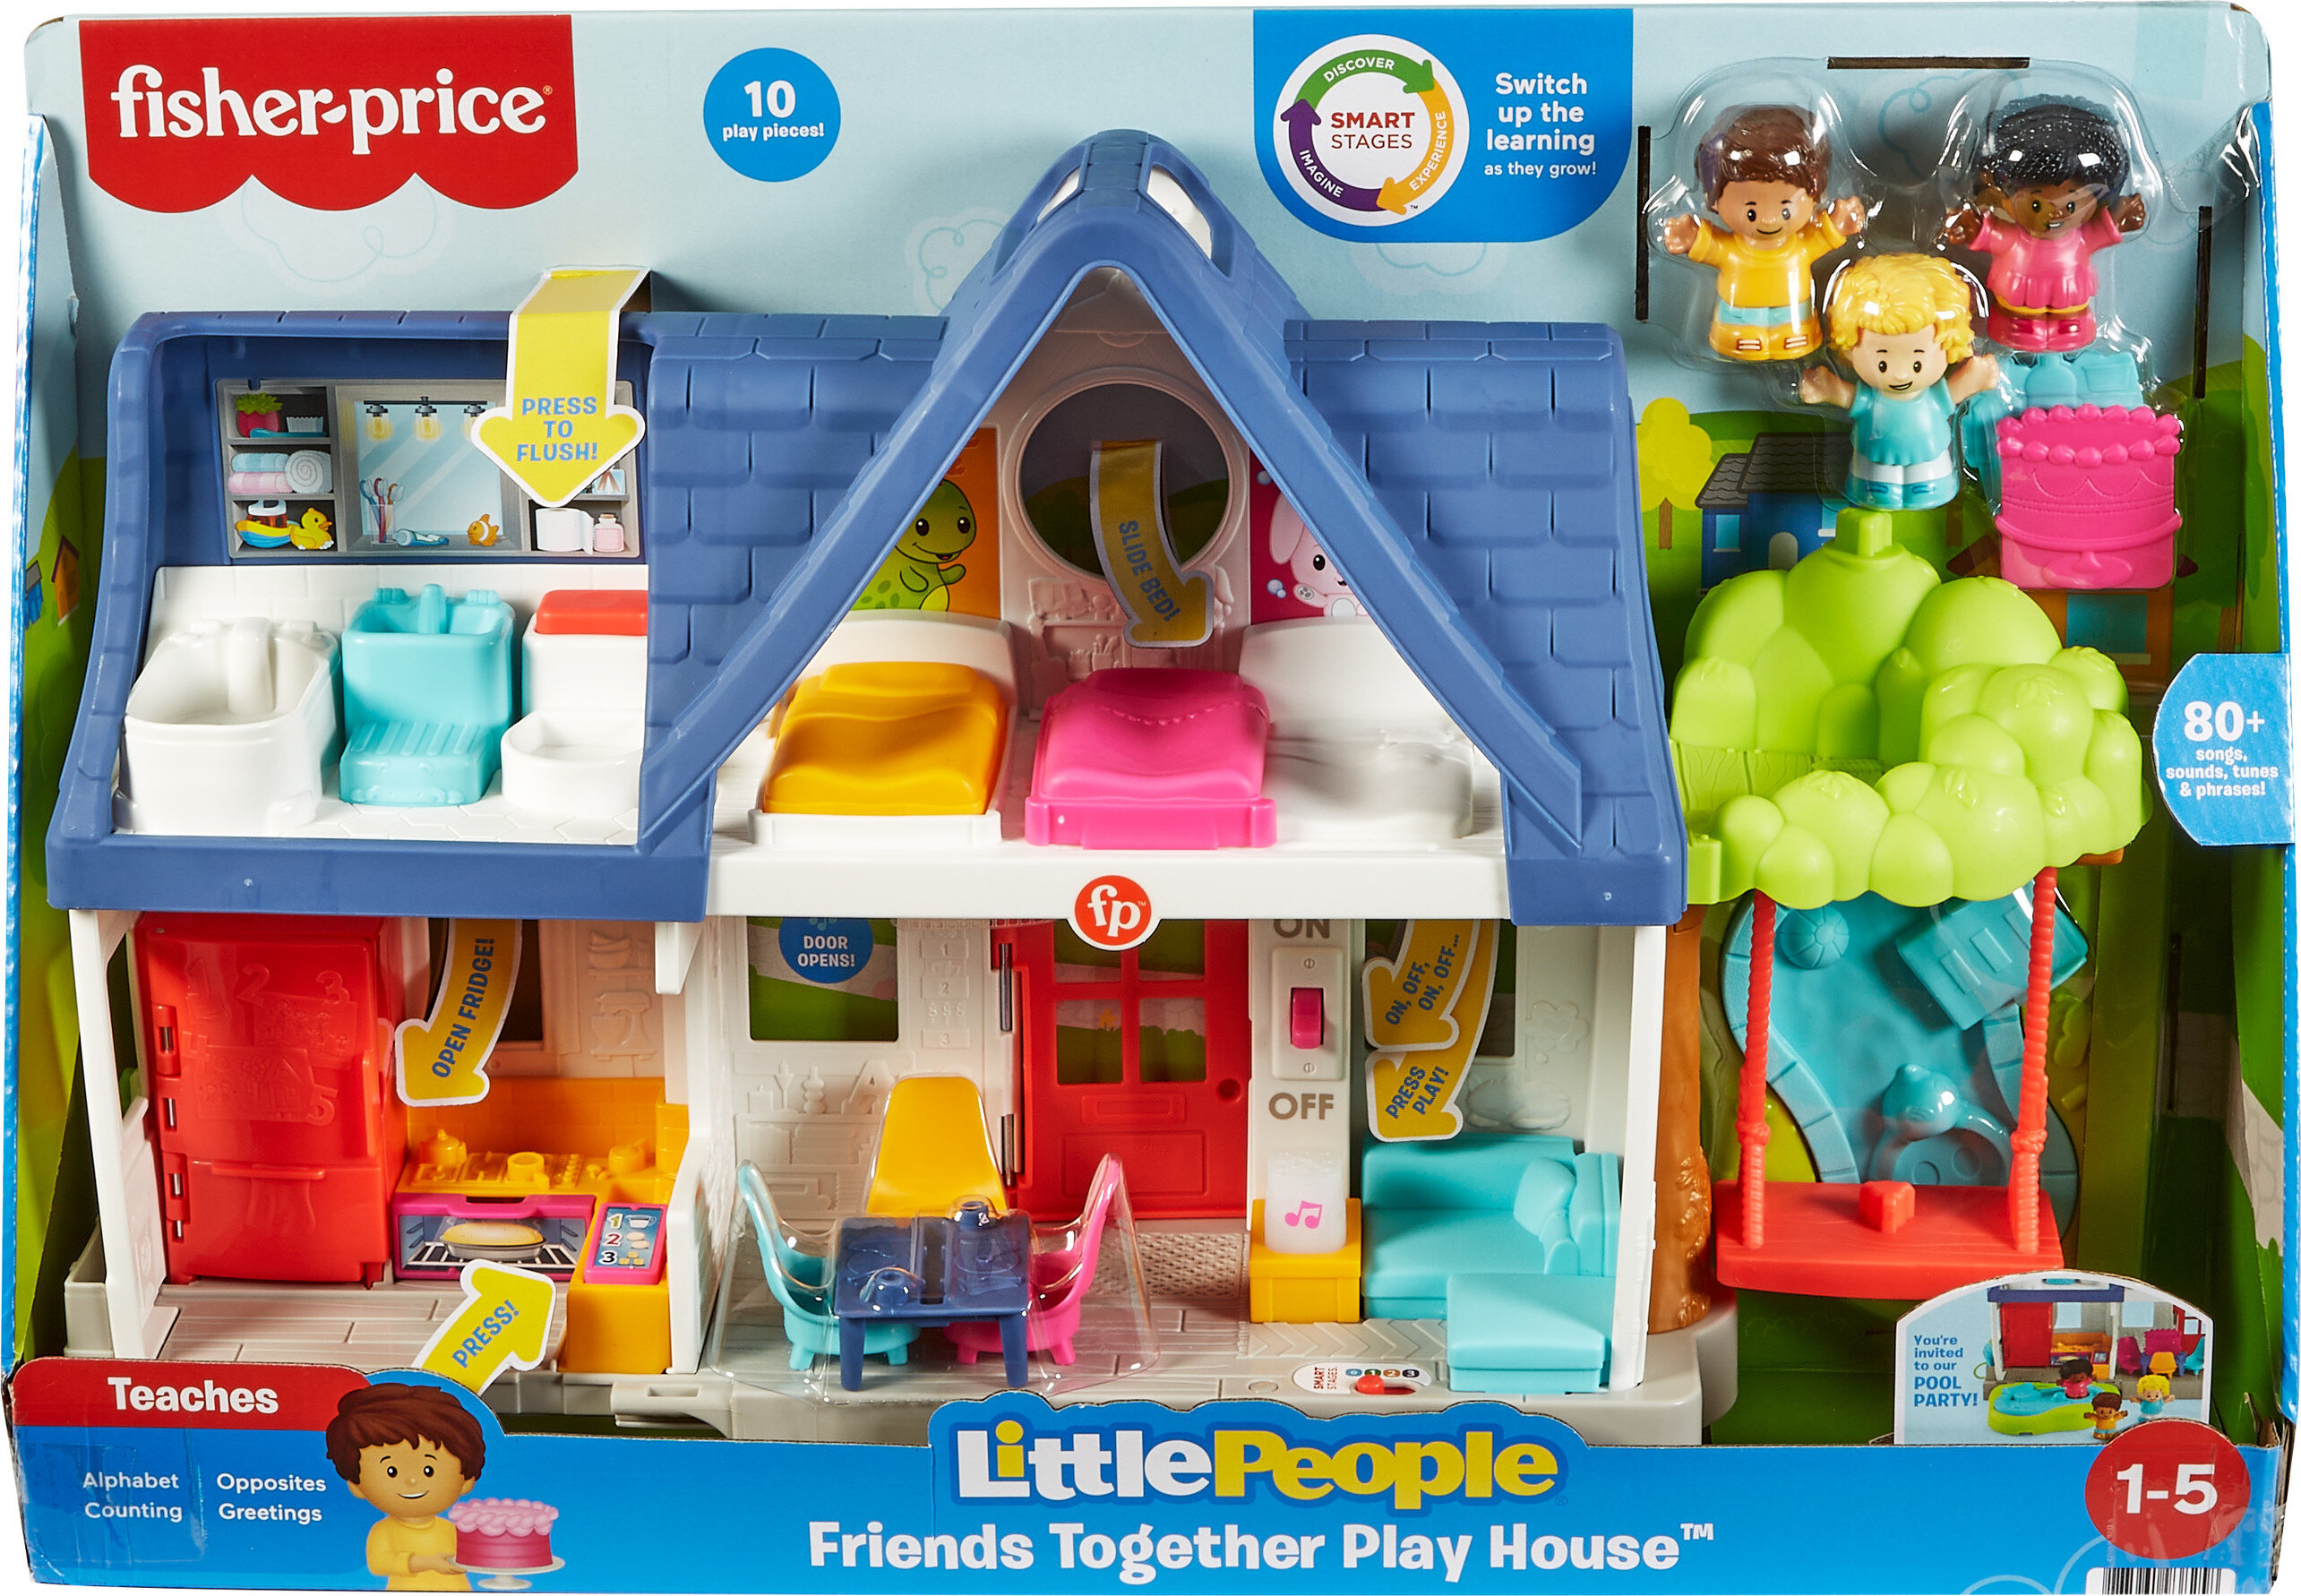 Fisher-Price Little People Friends Together Play House Toddler Learning Playset, 10 Pieces - image 7 of 7